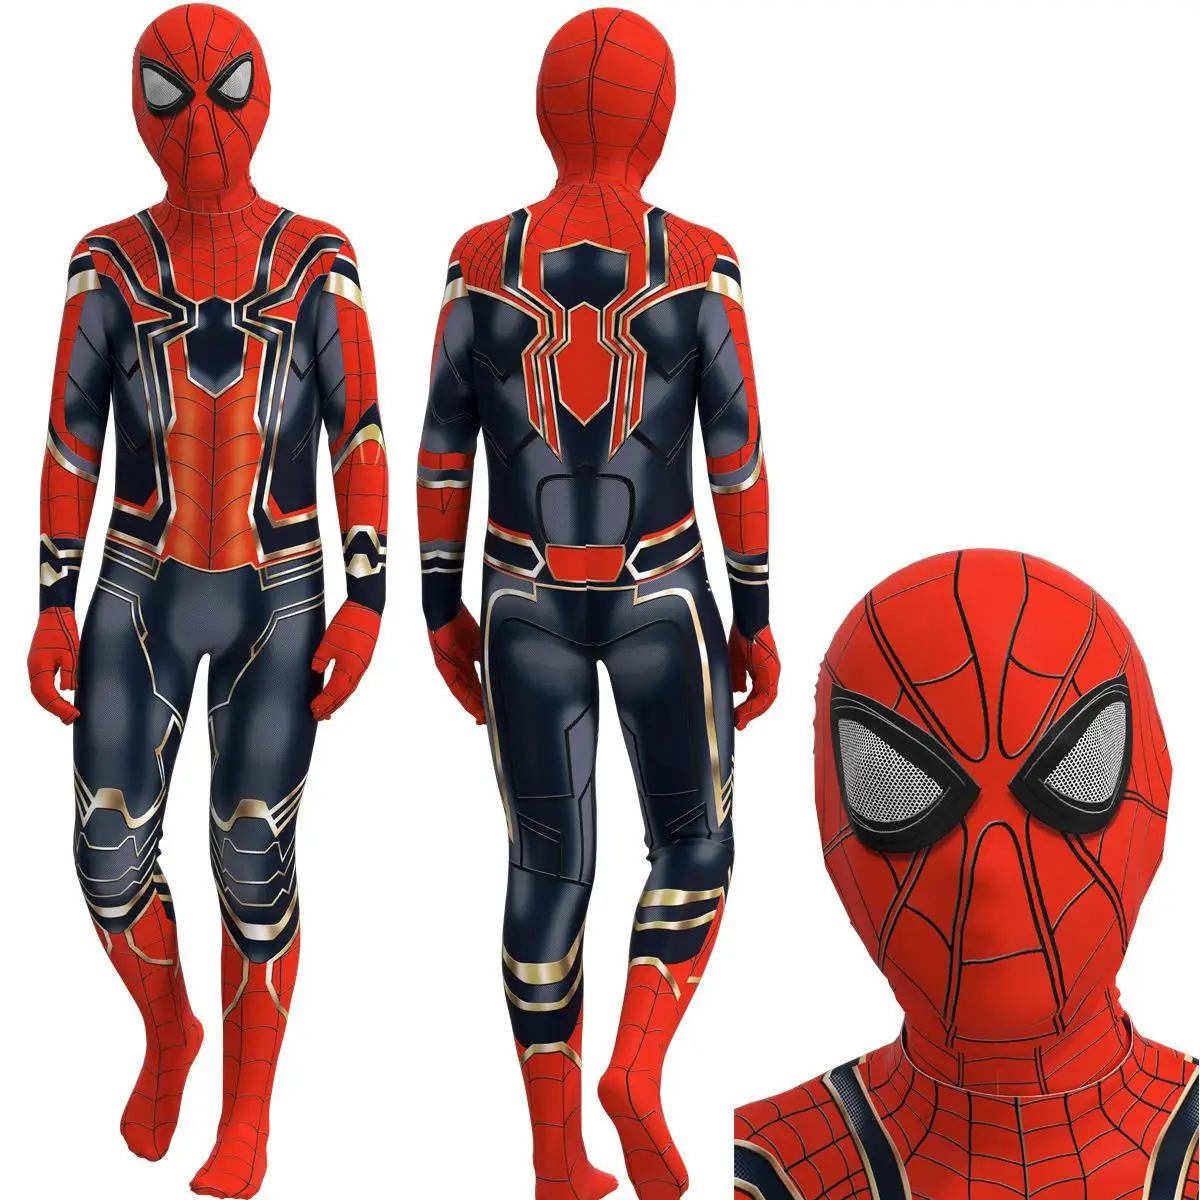 Halloween Costume Red Black Spider Man S-pider Man Cosplay Clothing Costume Fancy Jumpsuit For Adult And Kids